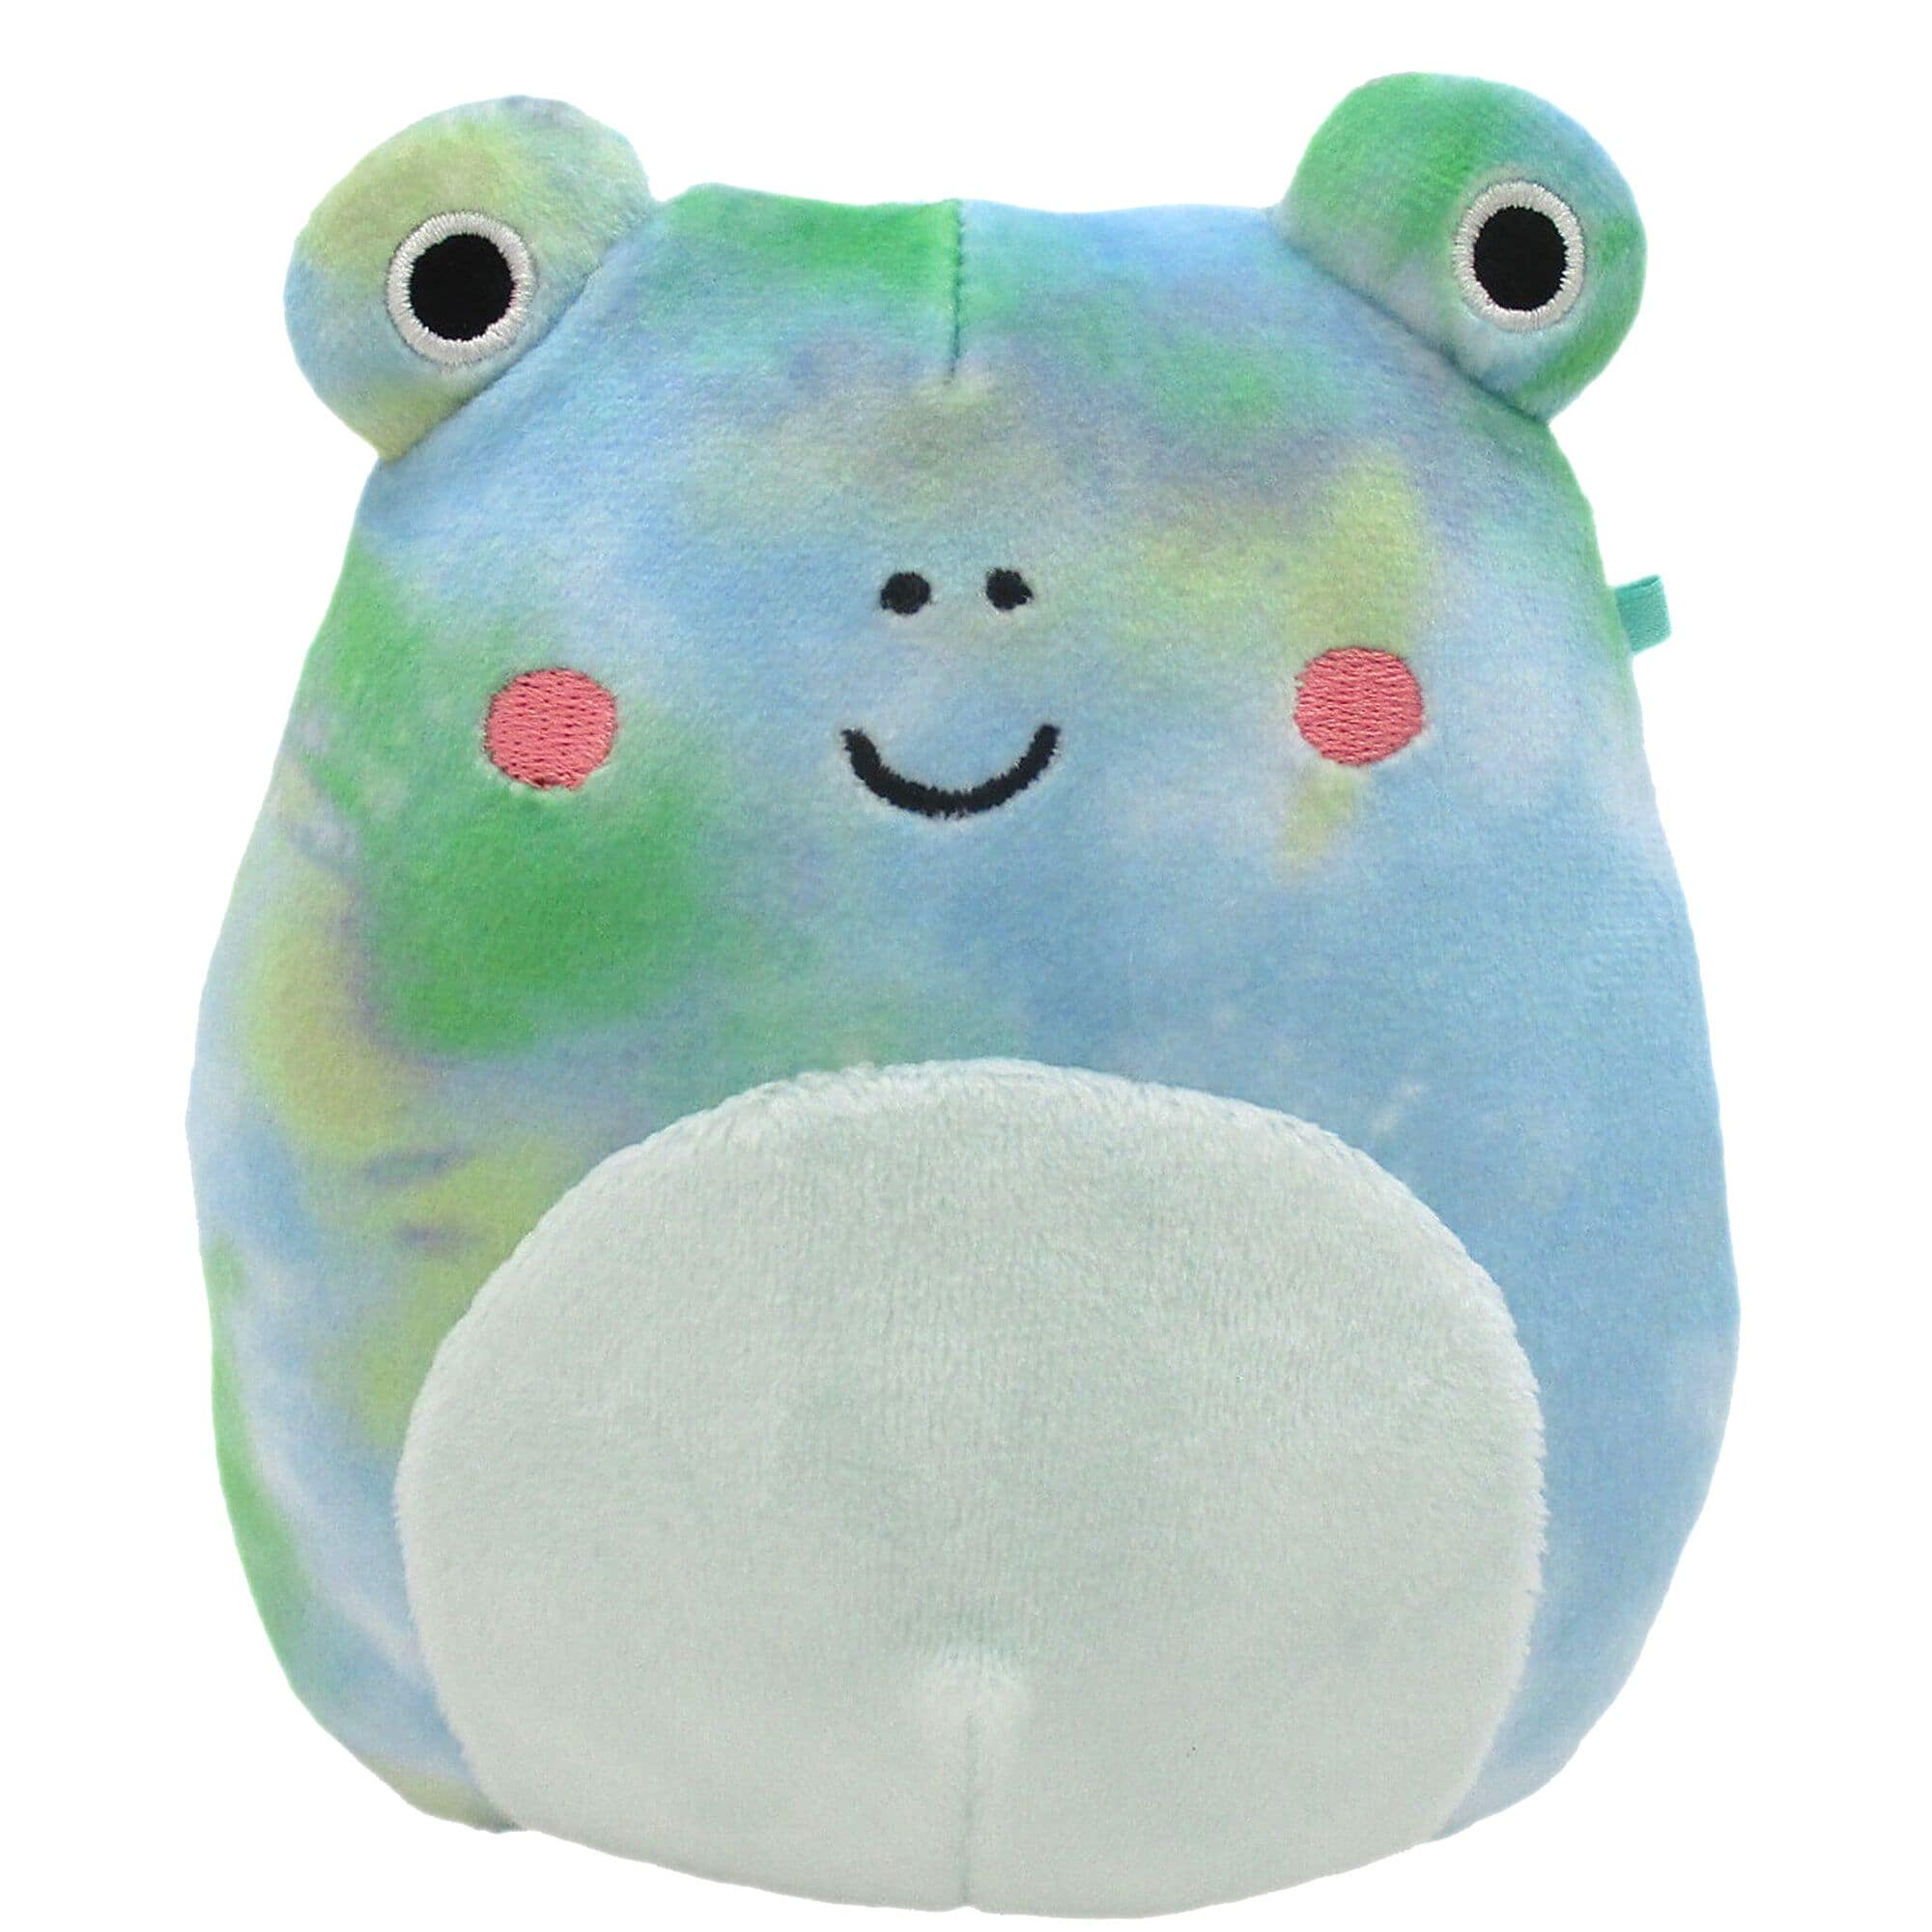 Squishmallow Plush Toy, Assorted, 5-in, Age 2+